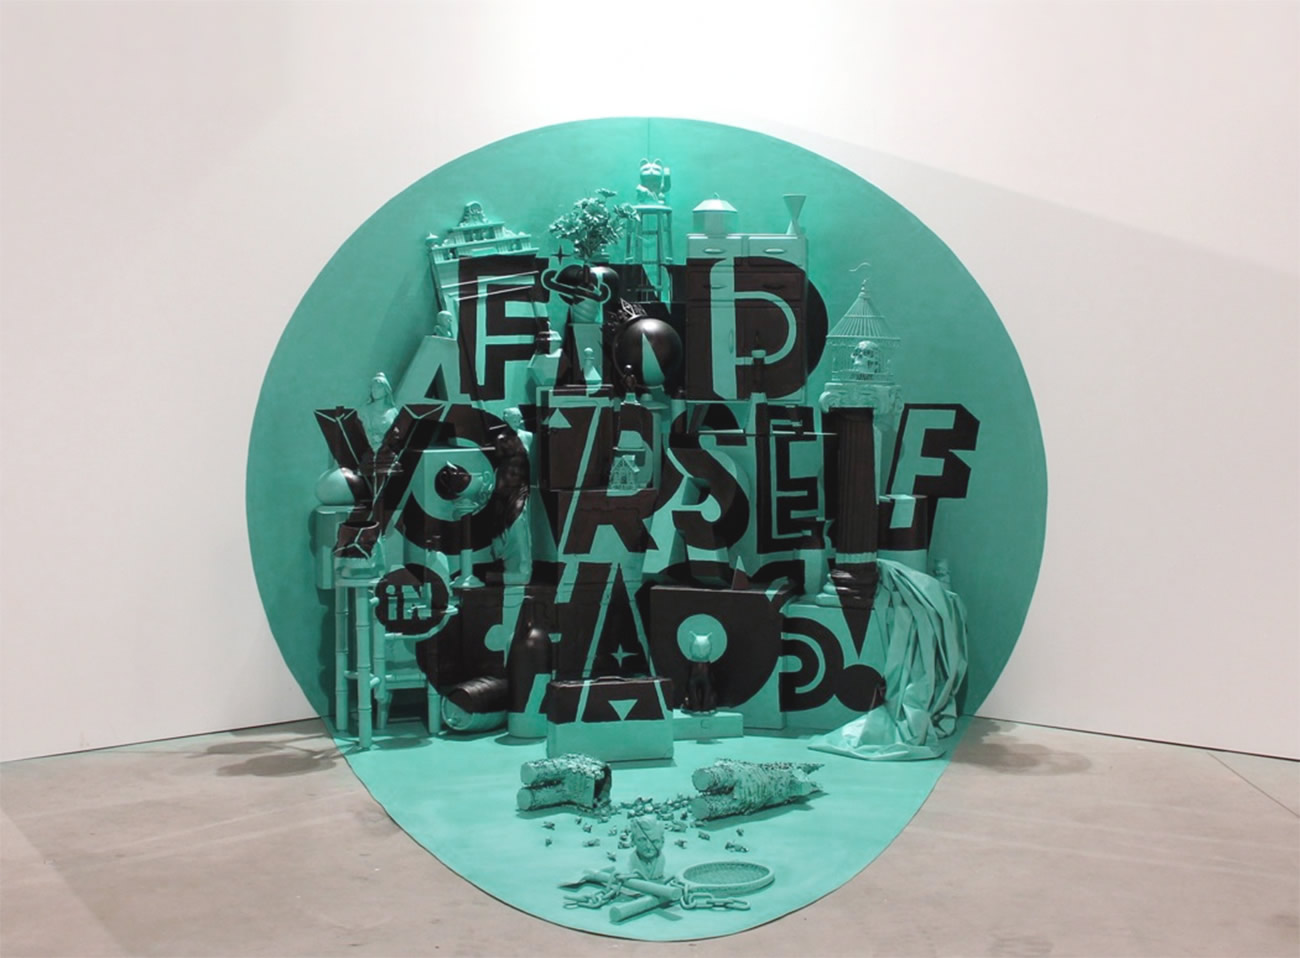 Find yourself in chaos by akacorleone, front view, various object forming words